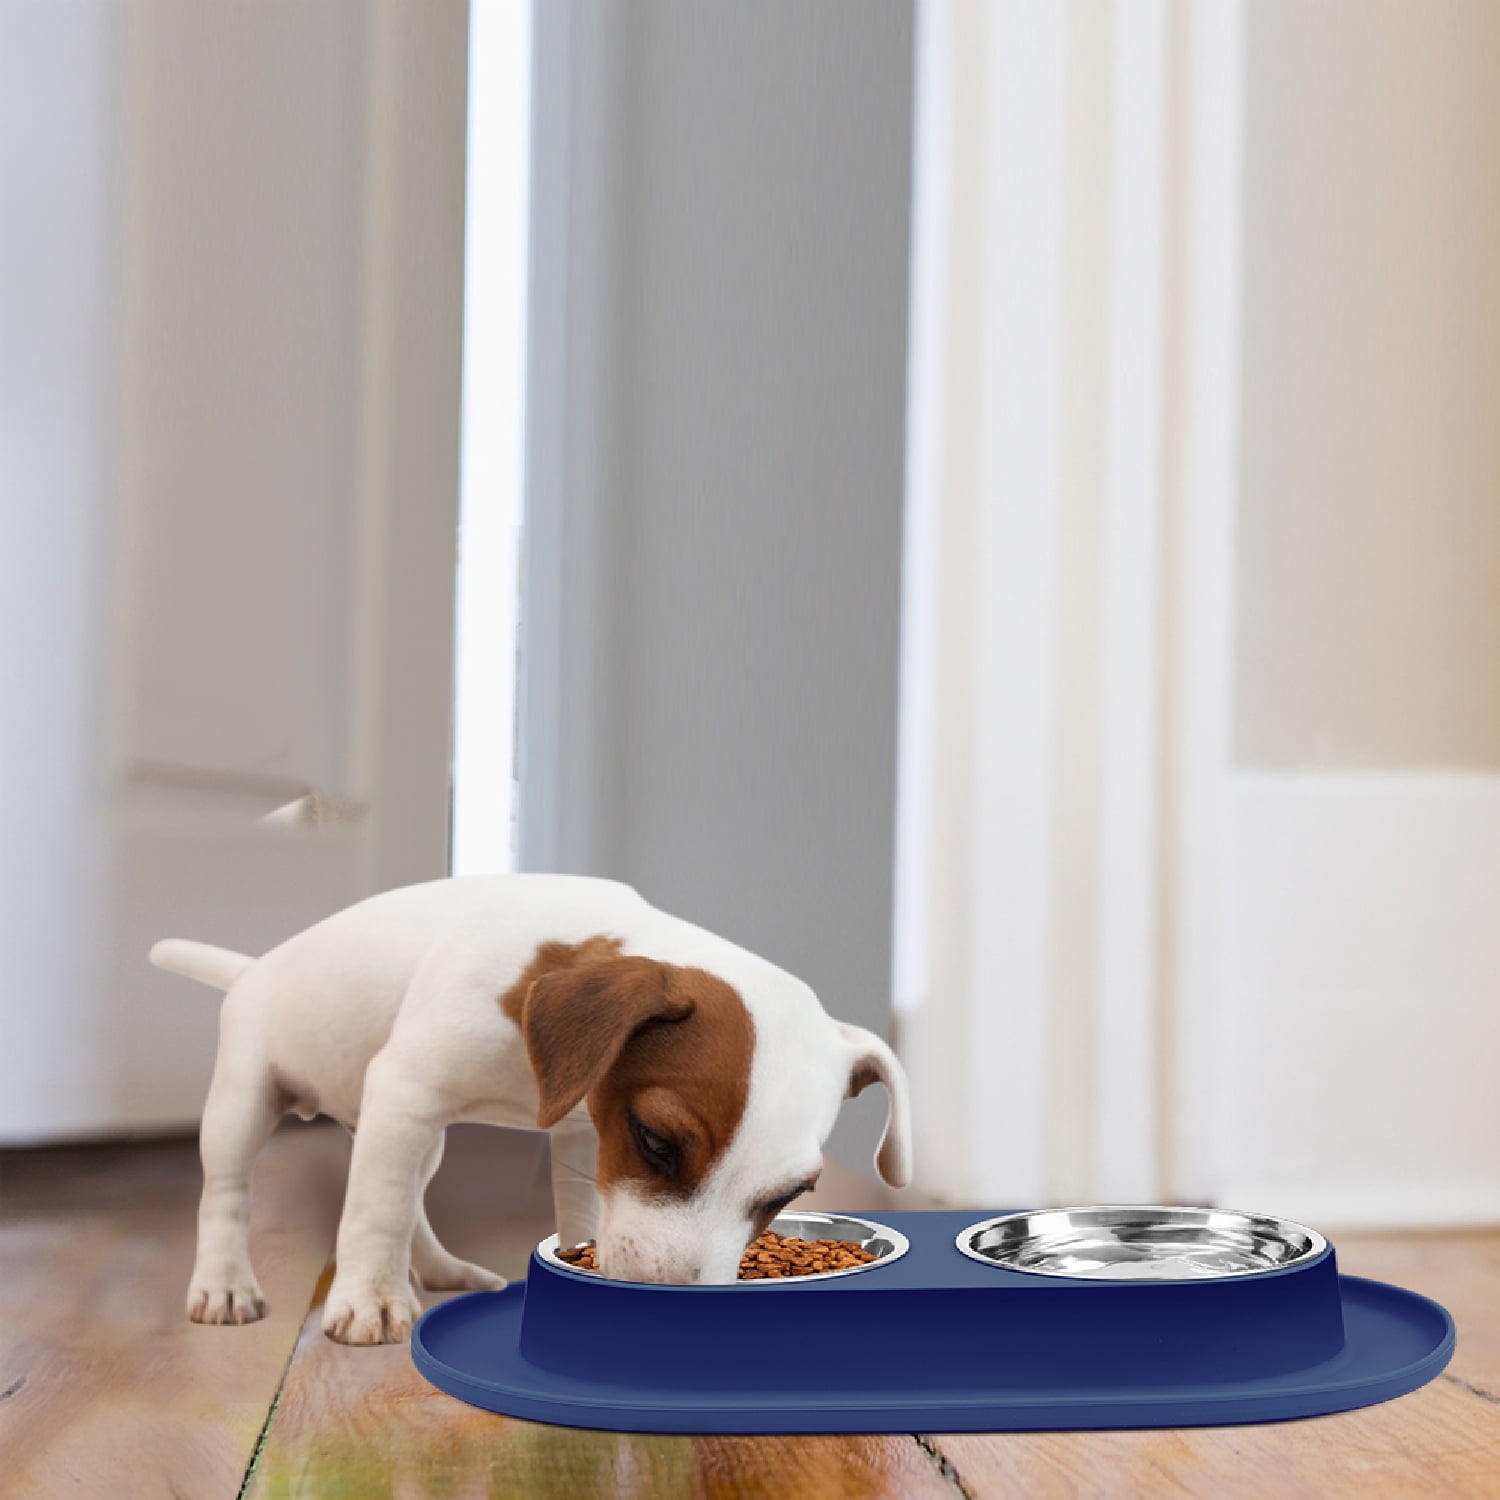 Bent & Freck bent & freck dog feeding station - spill proof small